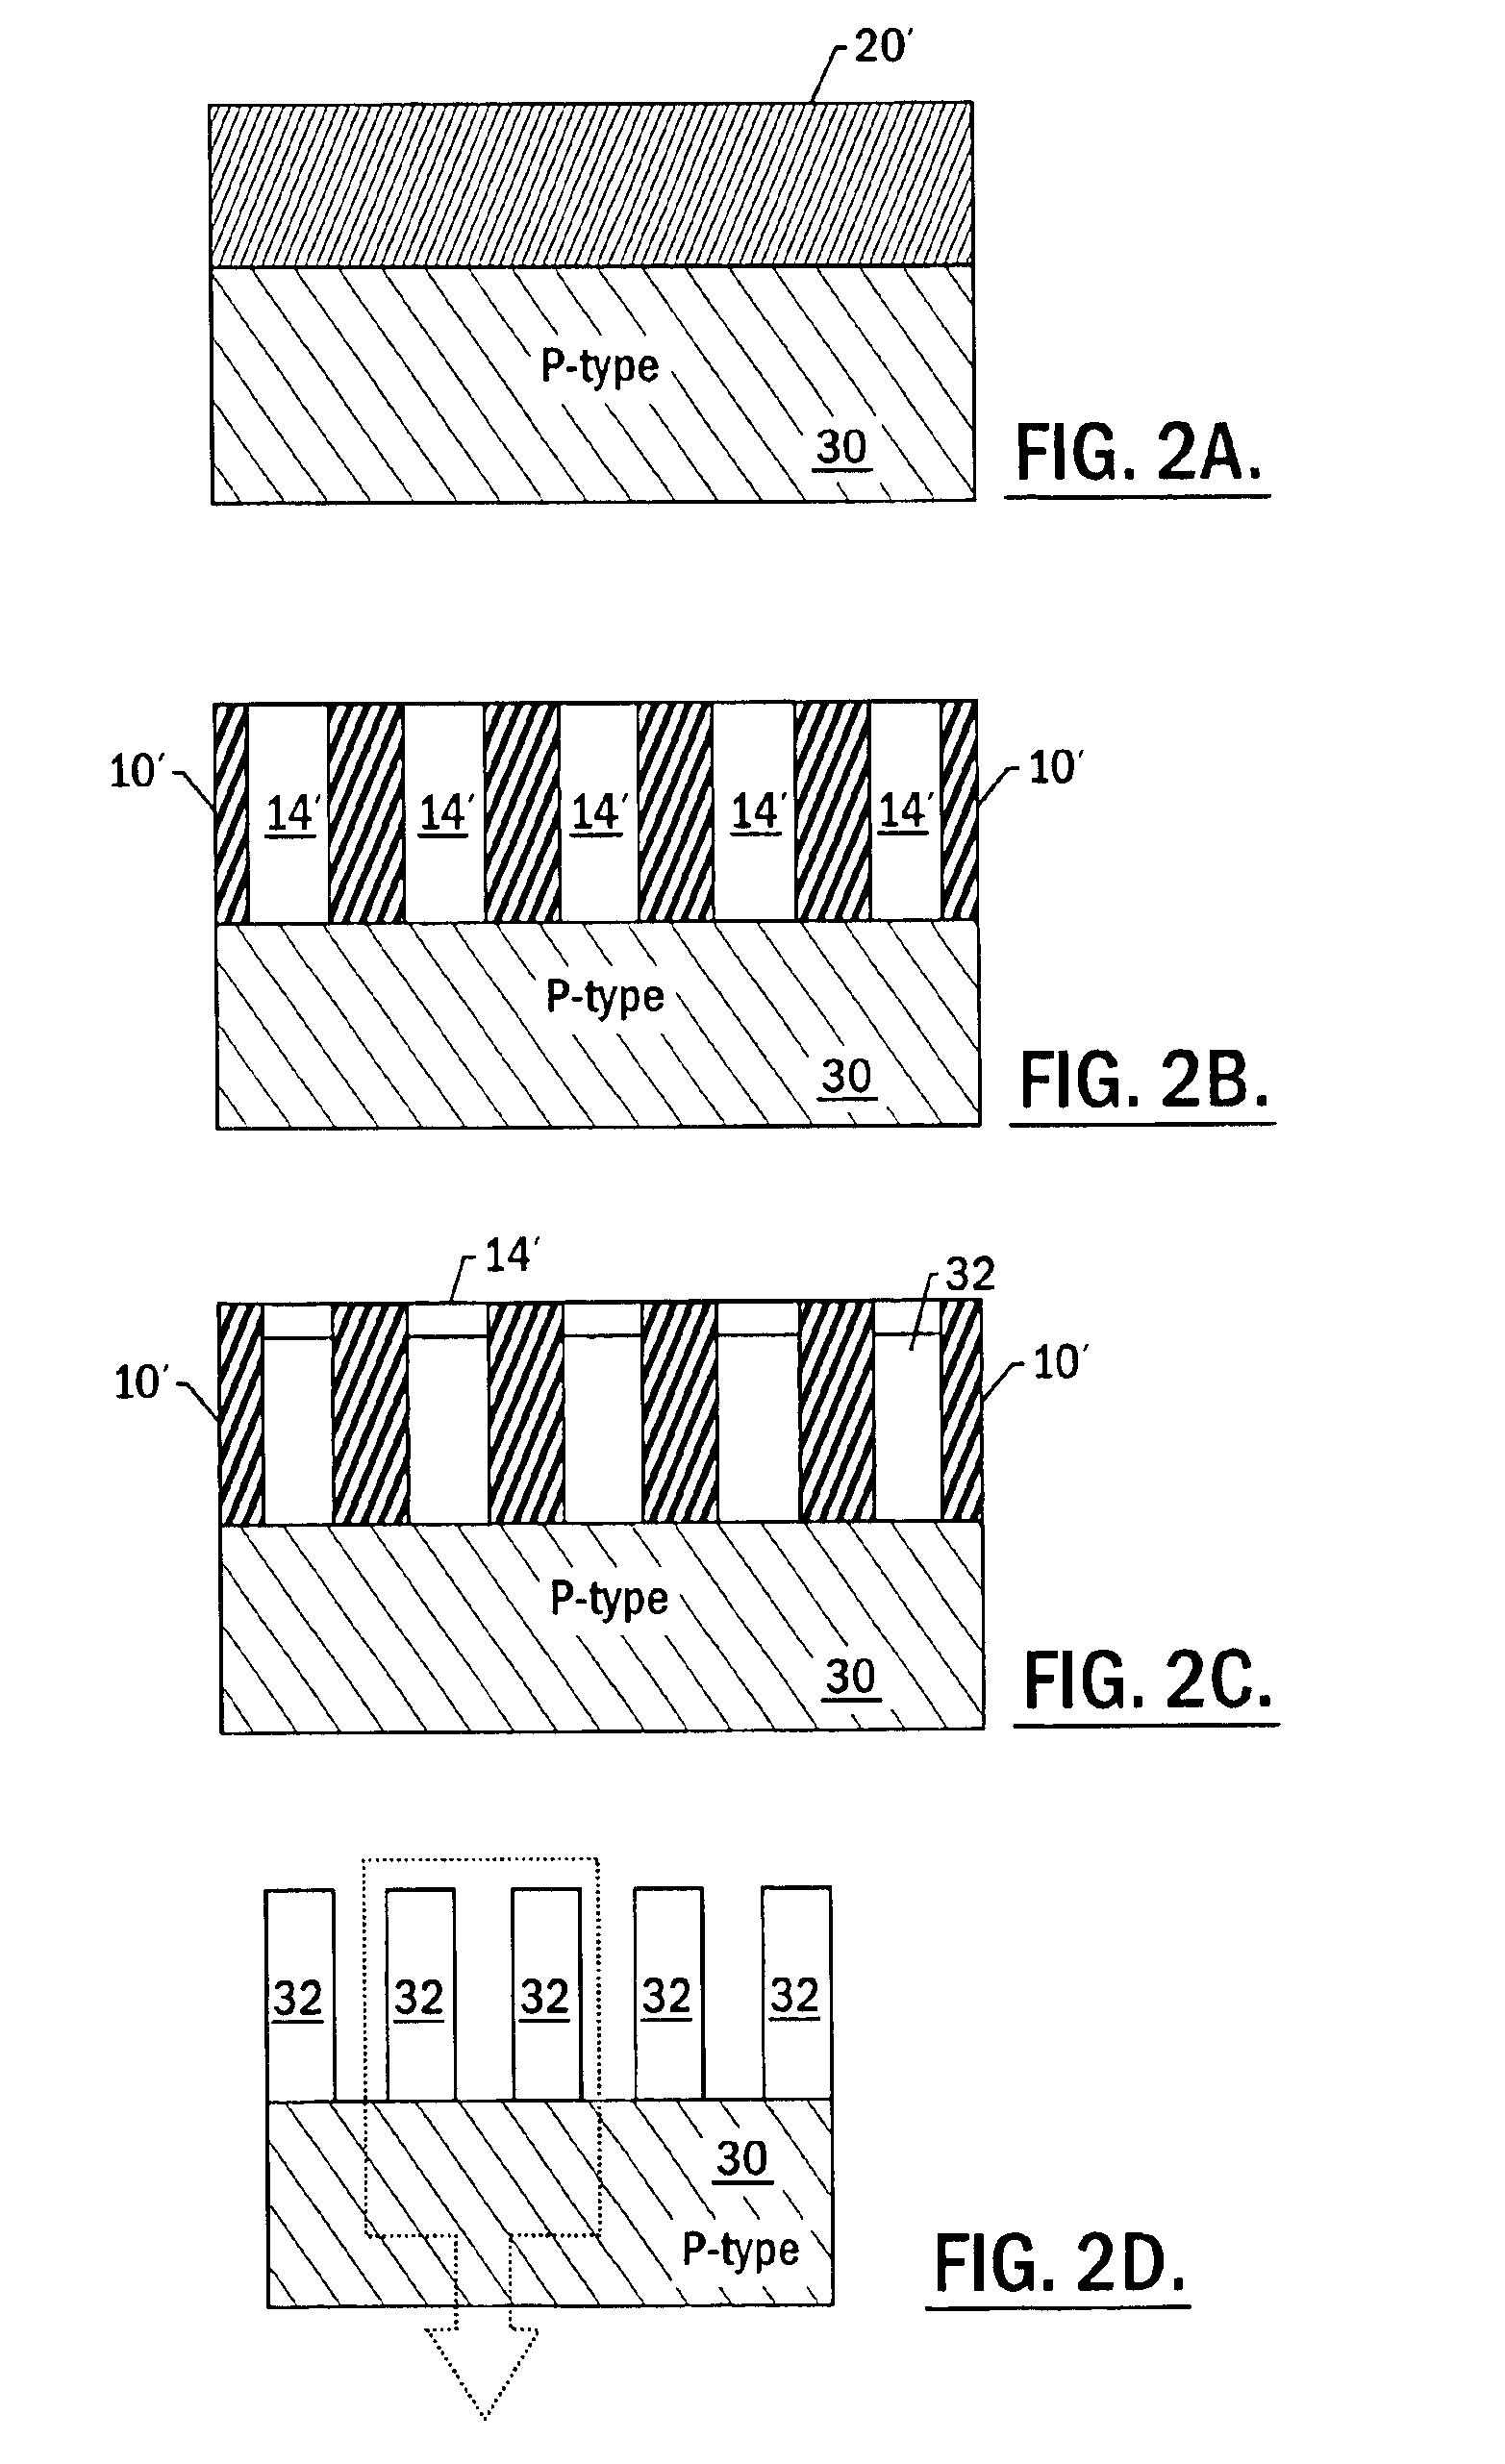 Optoelectronic devices having arrays of quantum-dot compound semiconductor superlattices therein